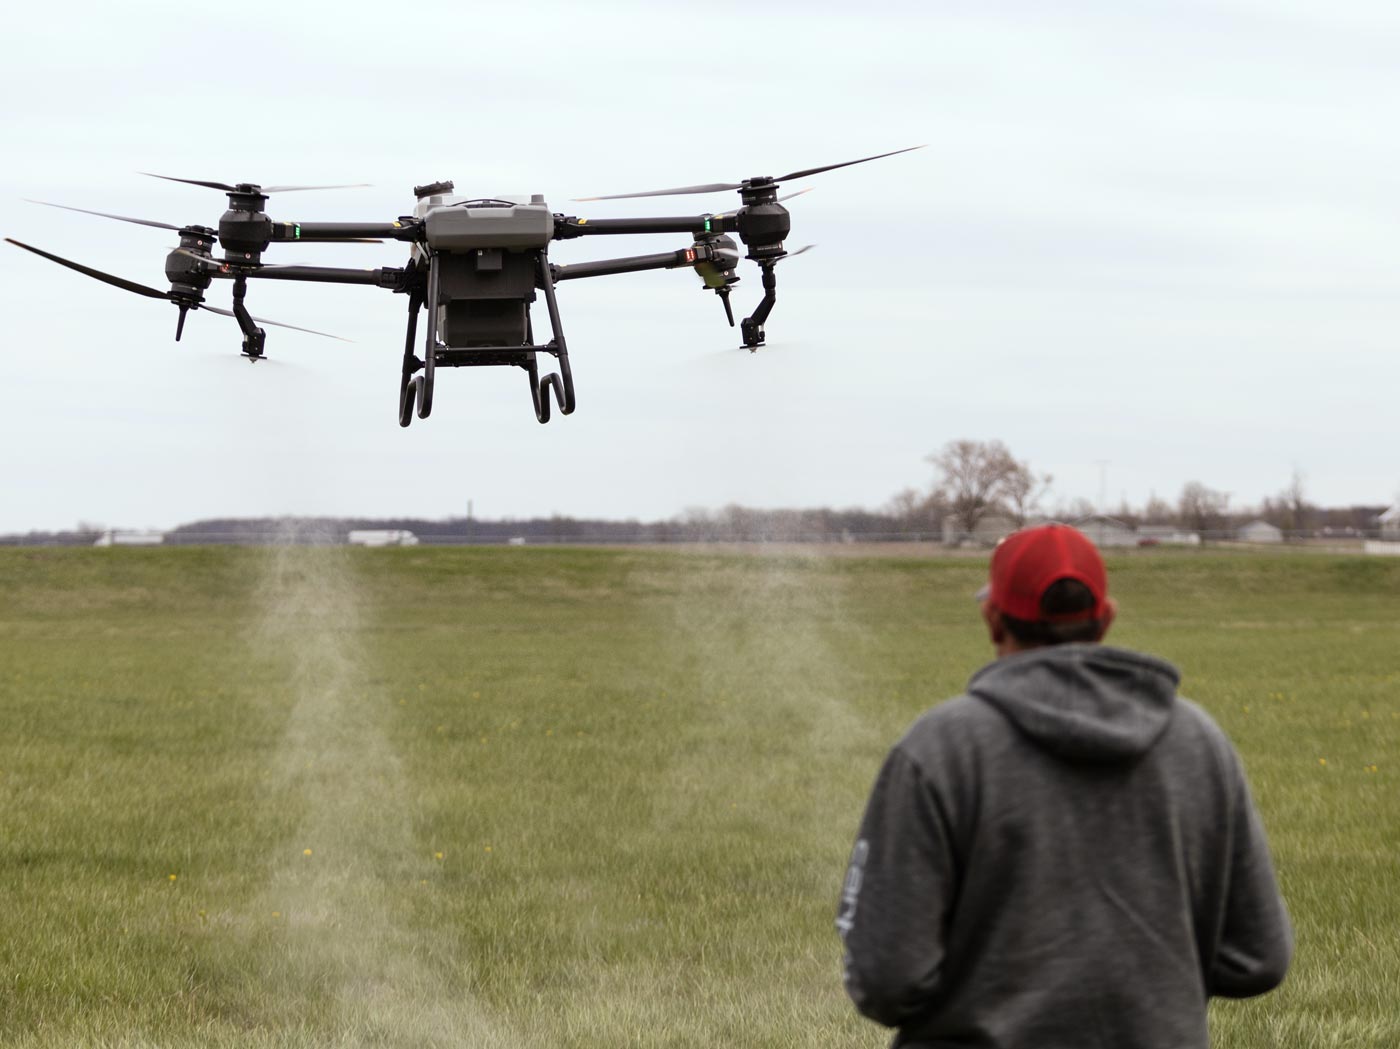 Agriculture Spray Drone in Action